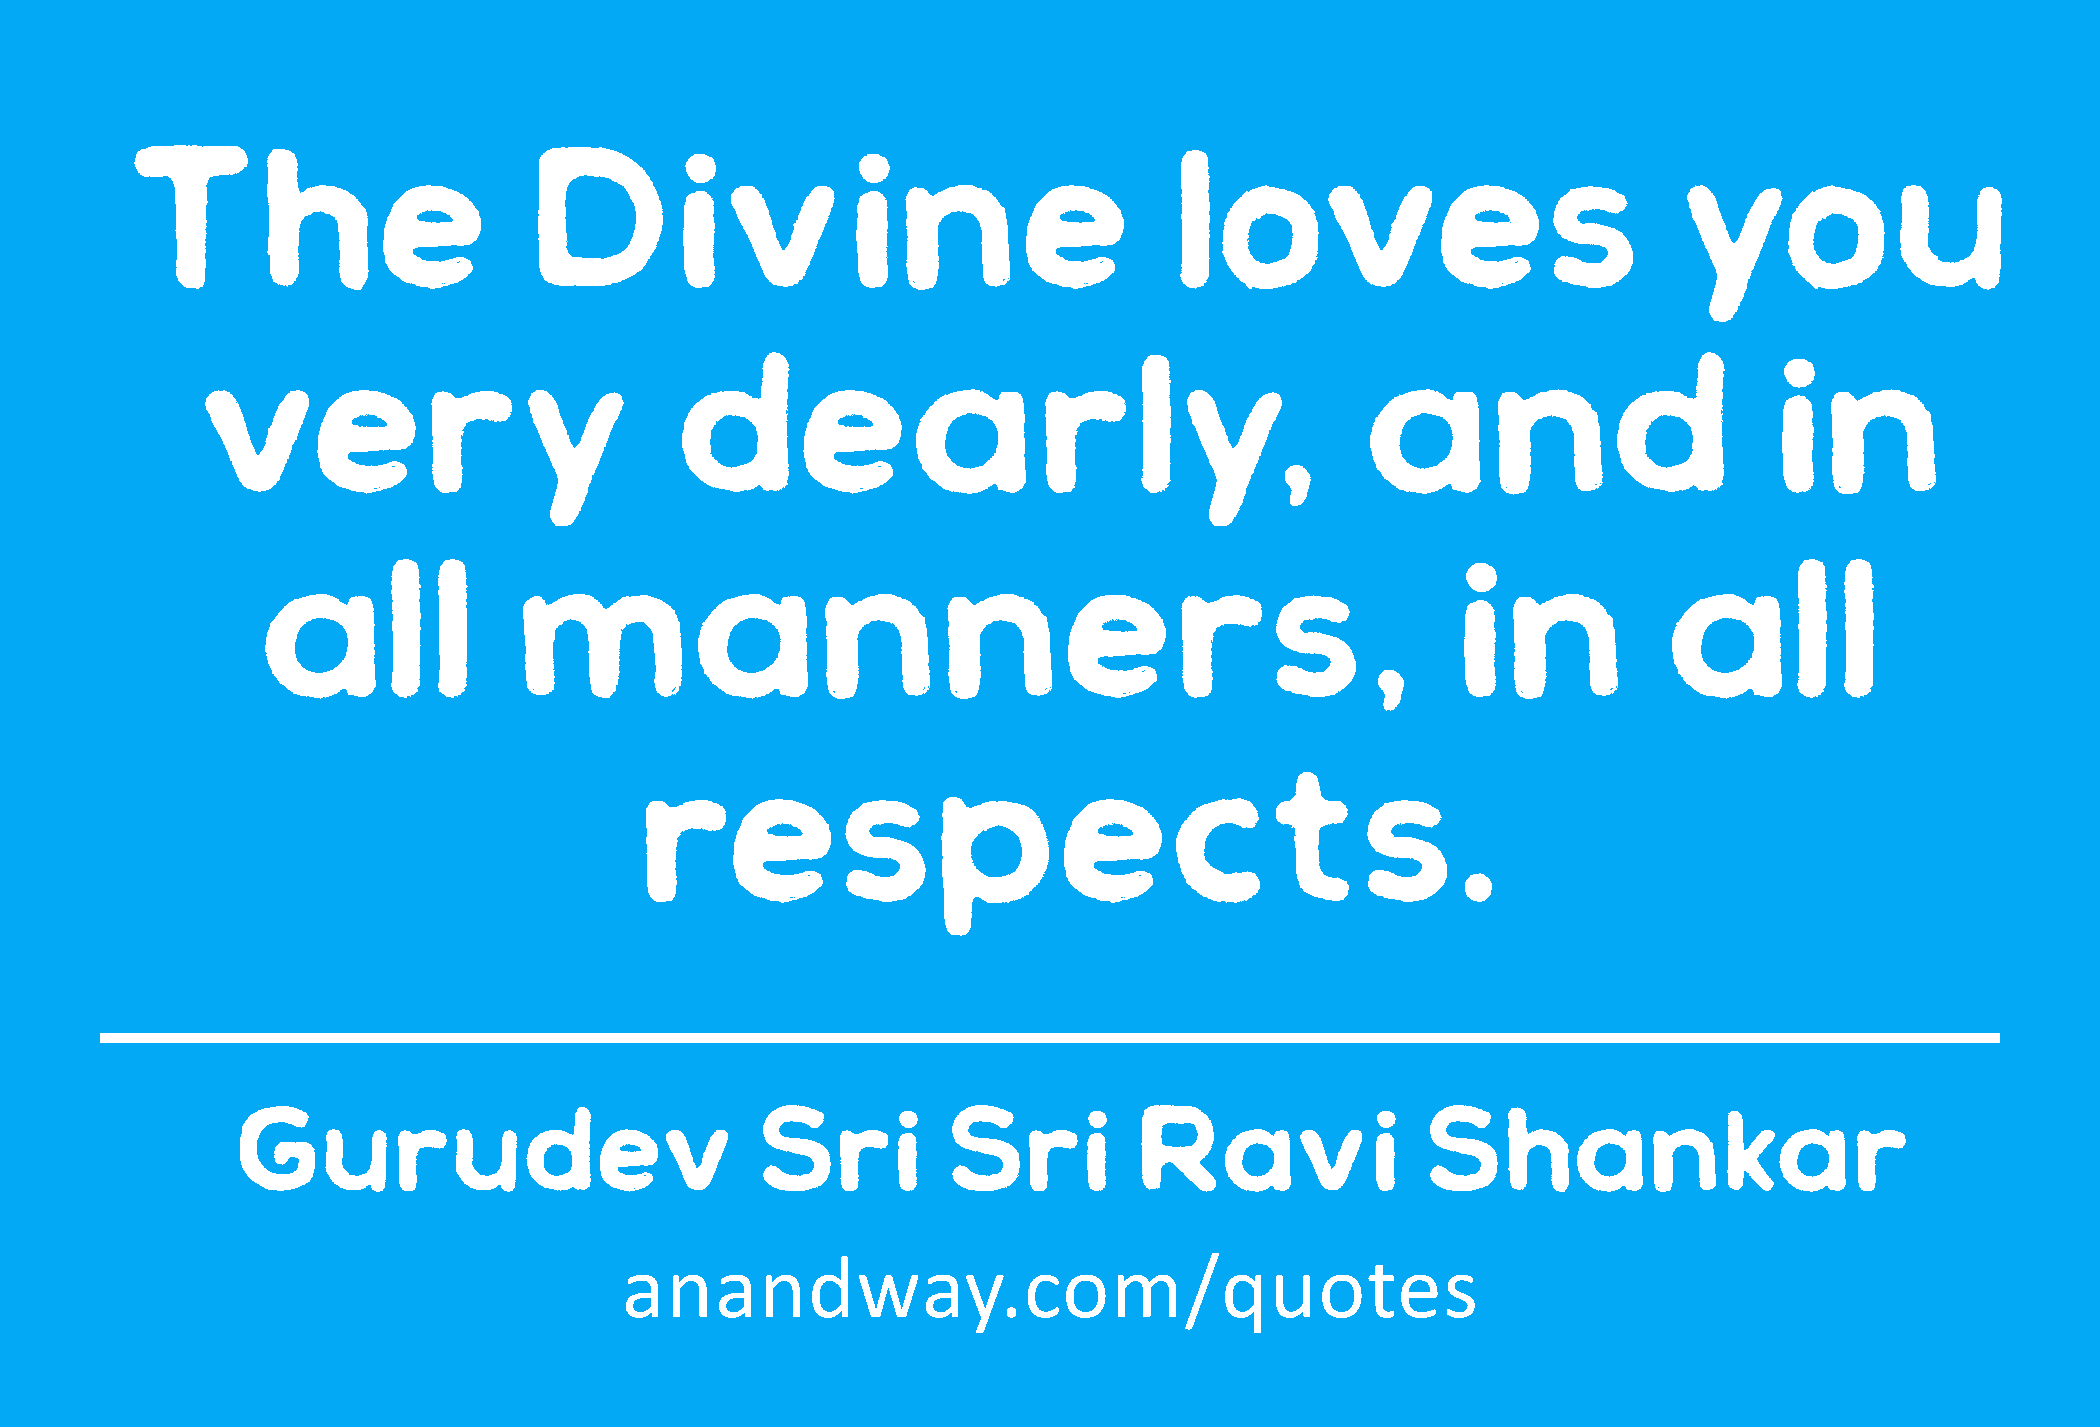 The Divine loves you very dearly, and in all manners, in all respects. 
 -Gurudev Sri Sri Ravi Shankar